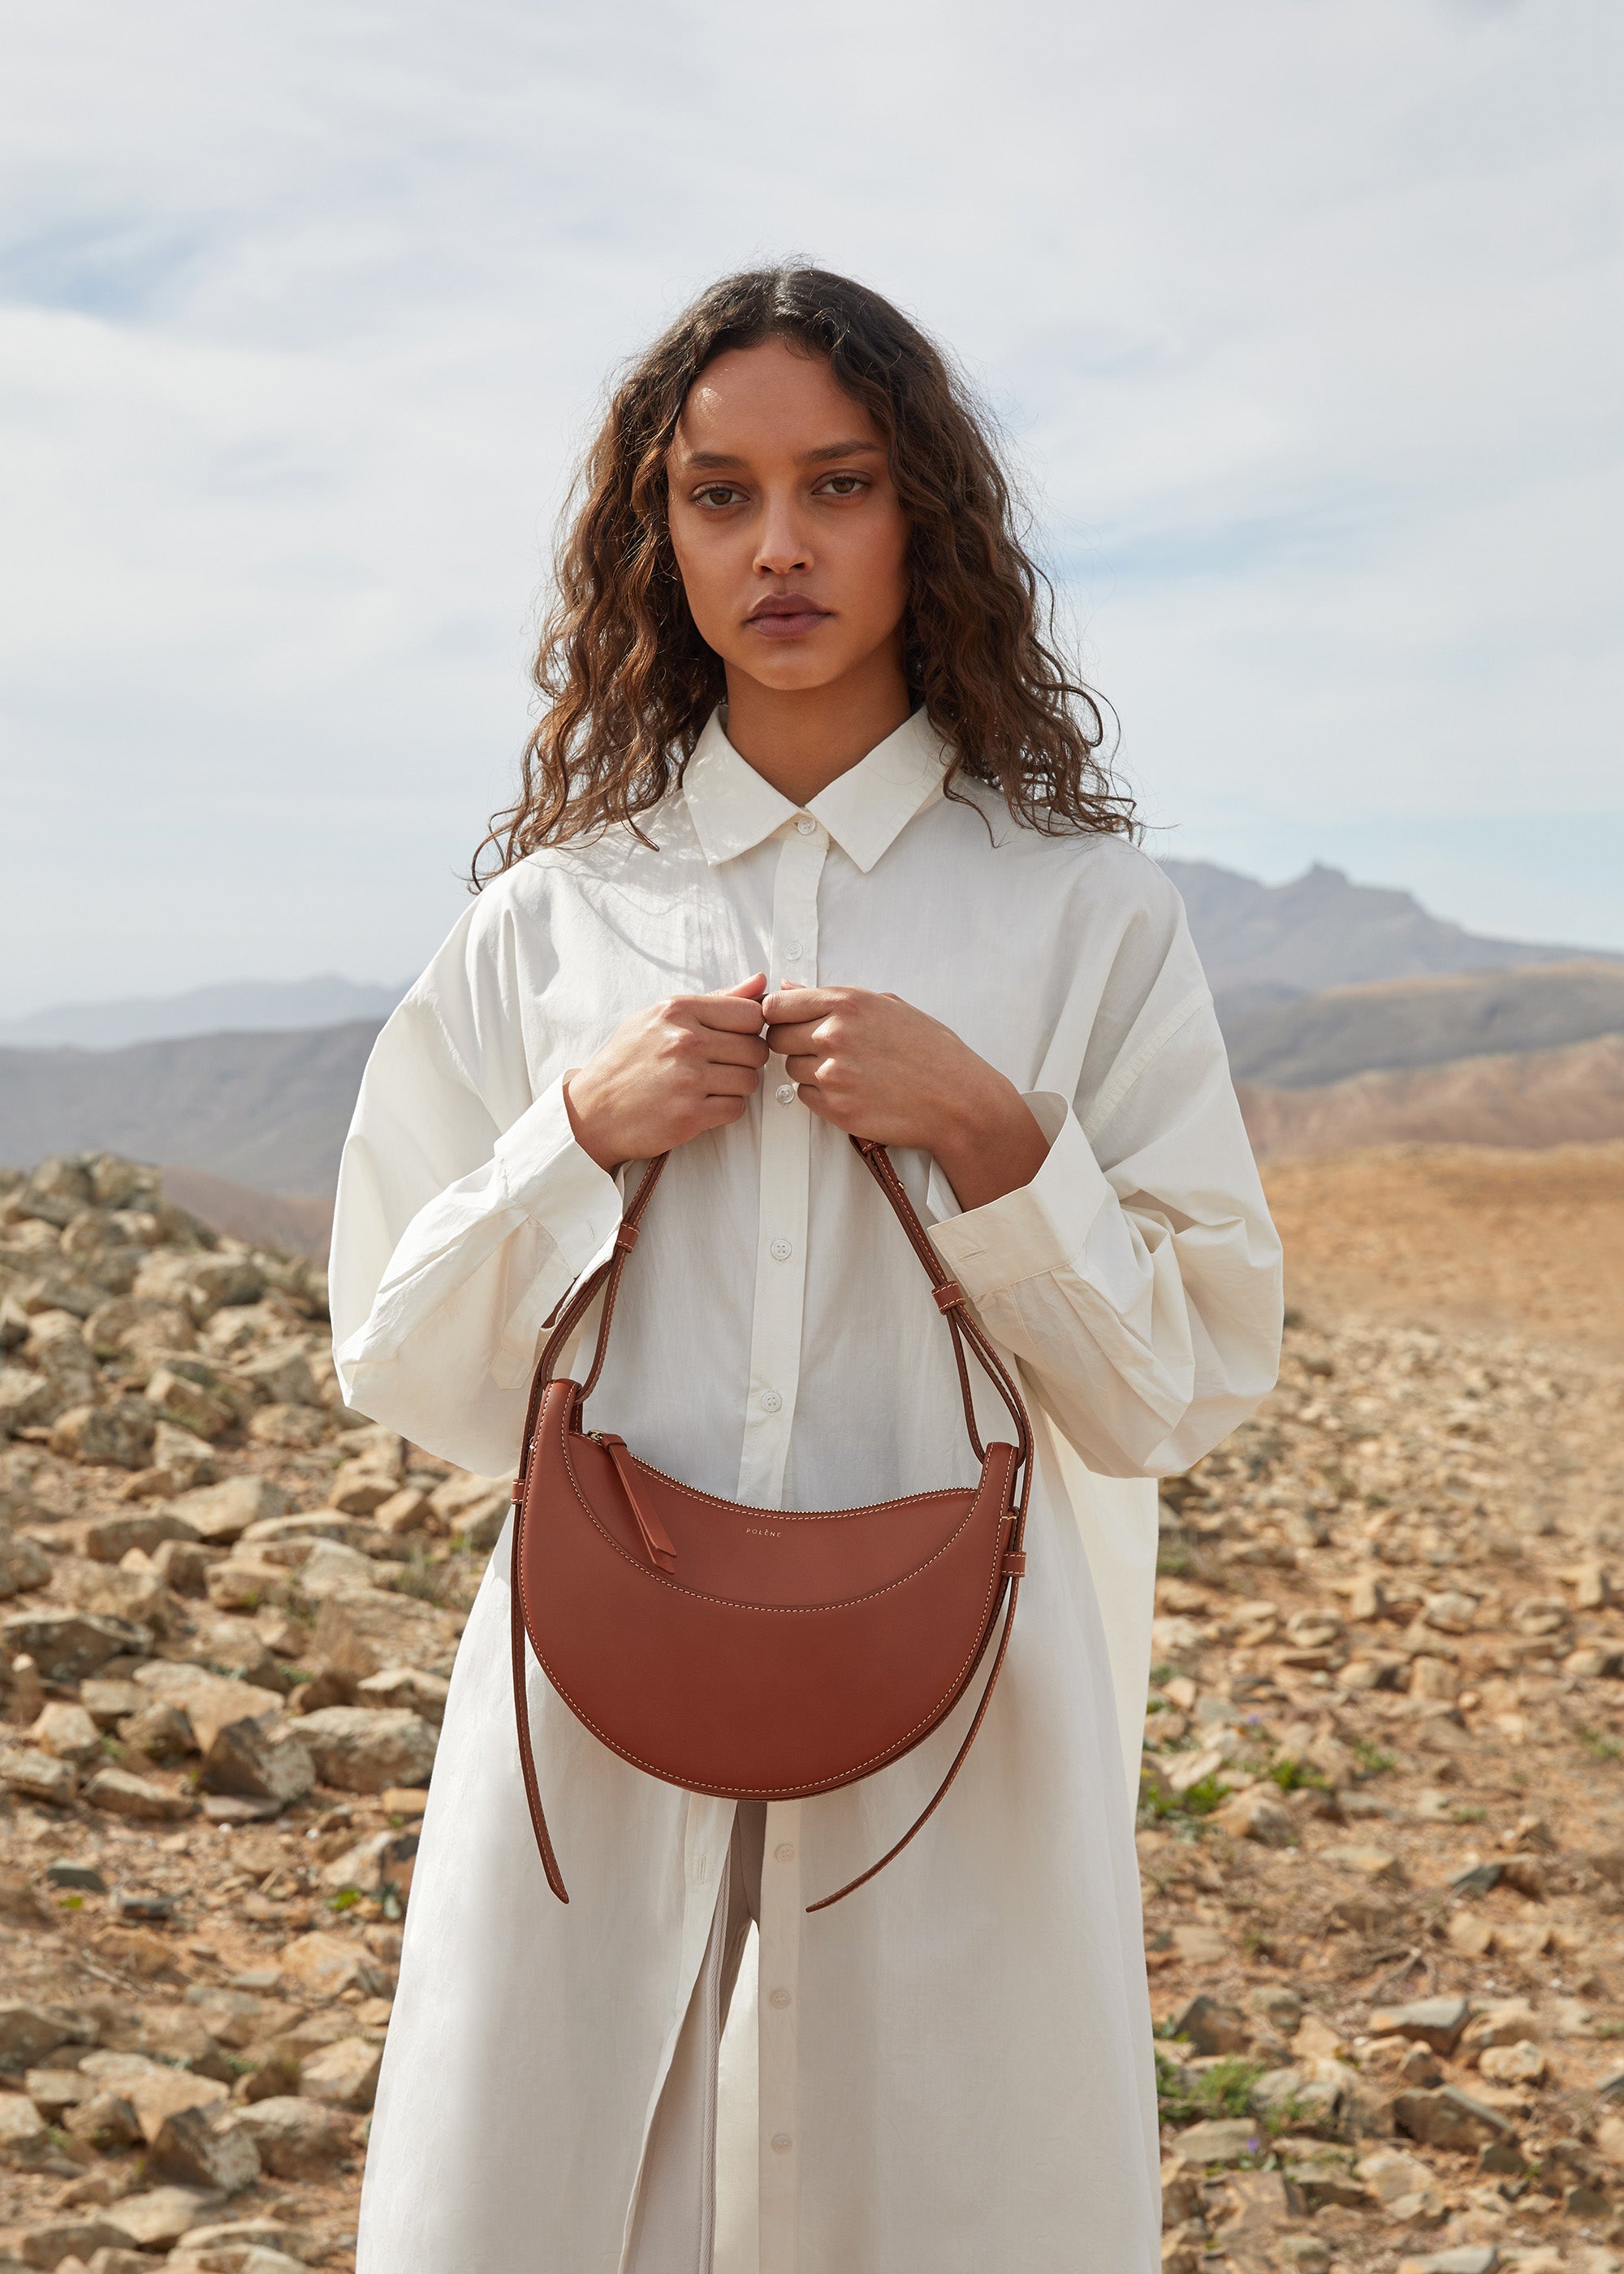 Polène Just Debuted a Teeny New Shoulder Bag and We Are Obsessed - PurseBlog